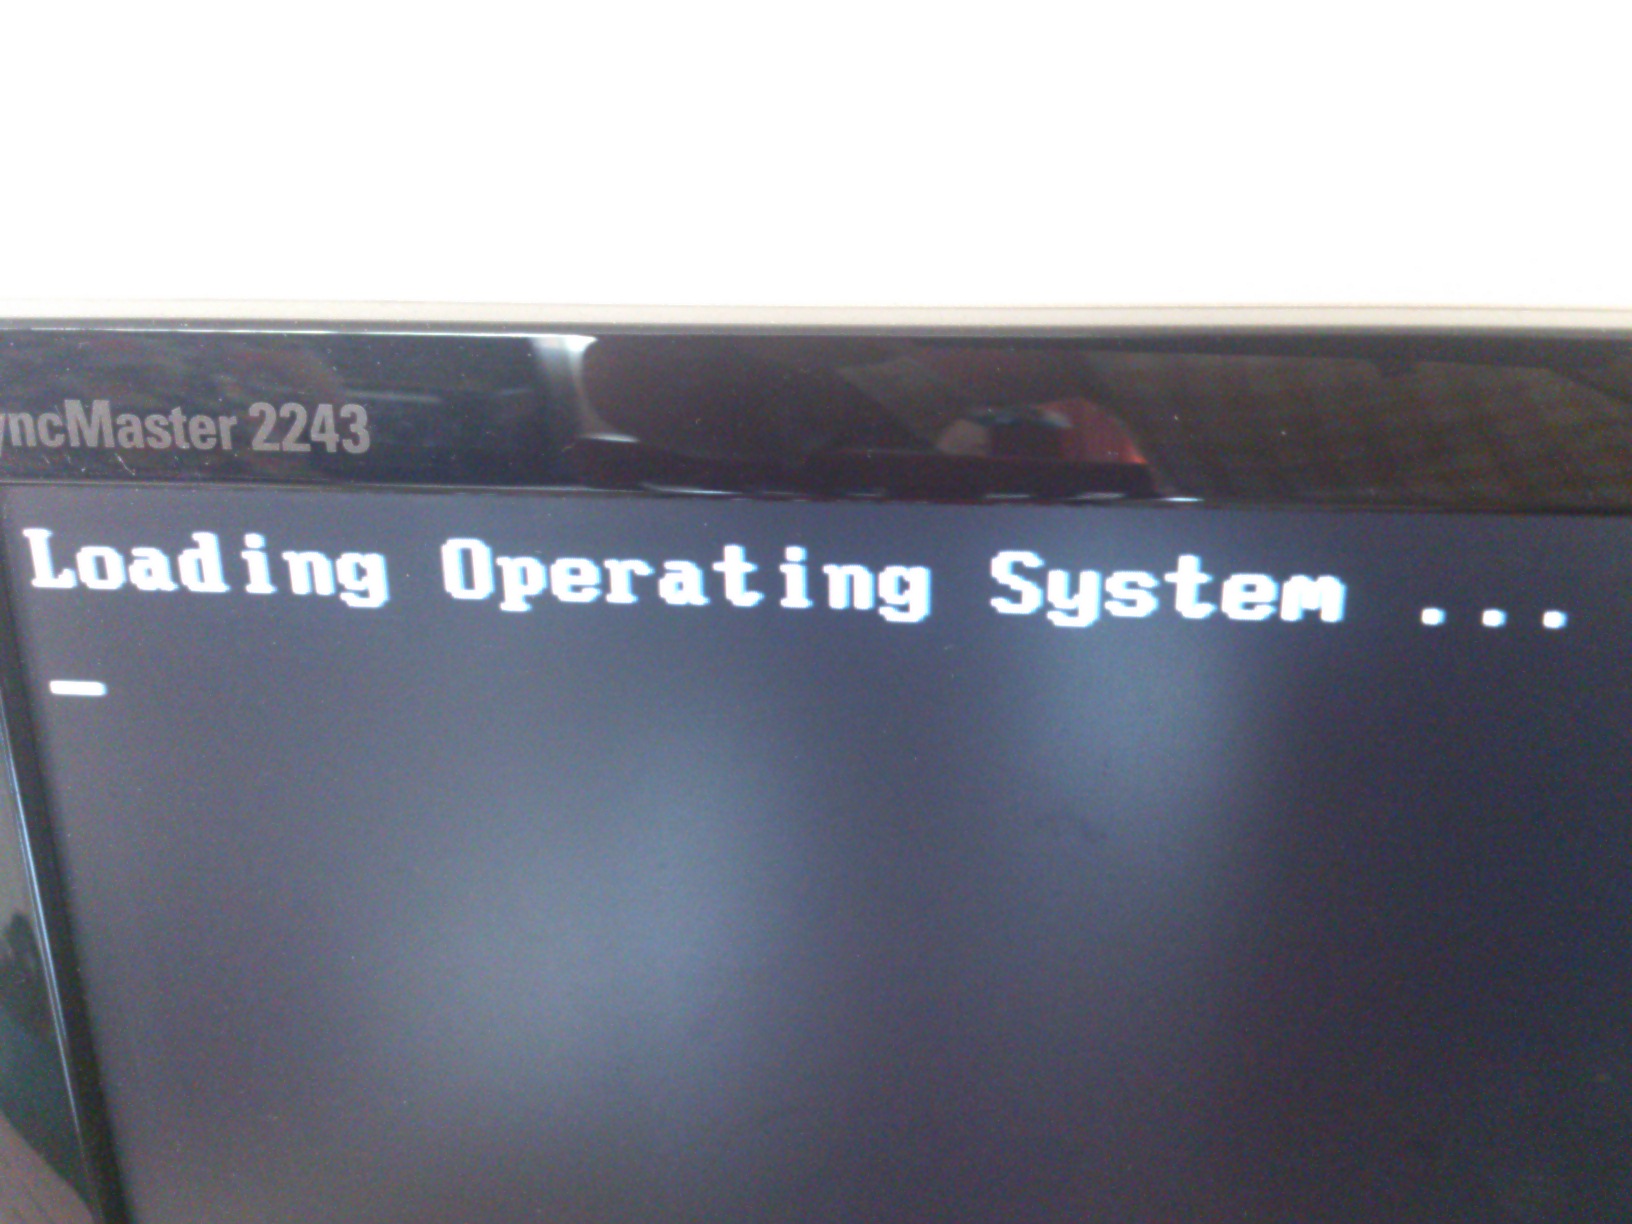 Disk Boot failure Insert System Disk and Press enter. Error loading operating